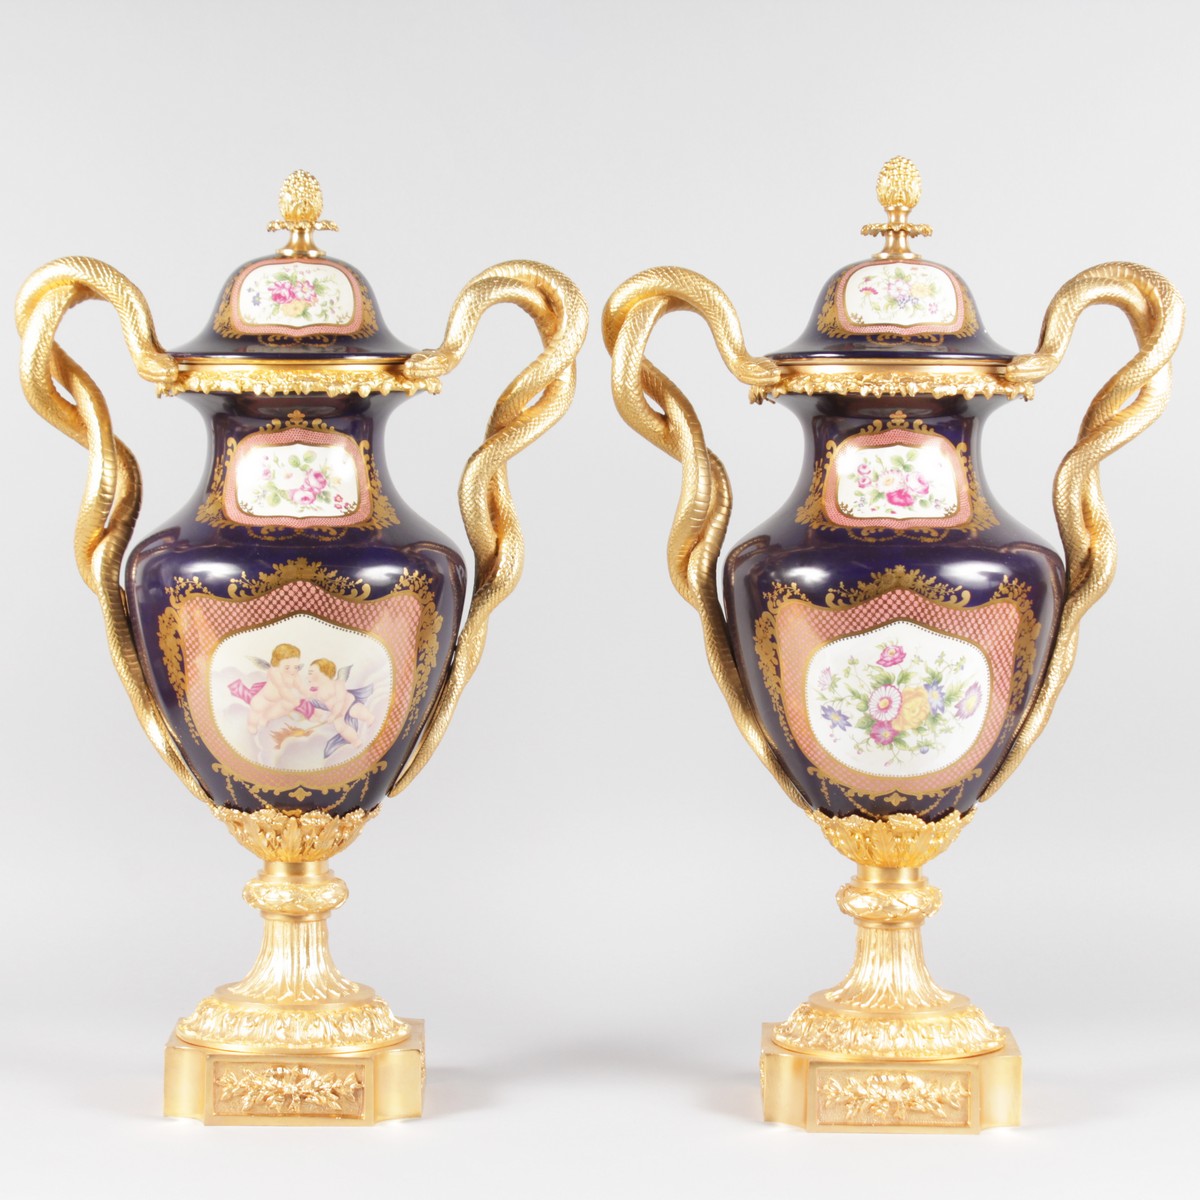 A SUPERB PAIR OF "SEVRES" BLUE PORCELAIN TWO HANDLED URNS AND COVERS, painted with reverse scenes,